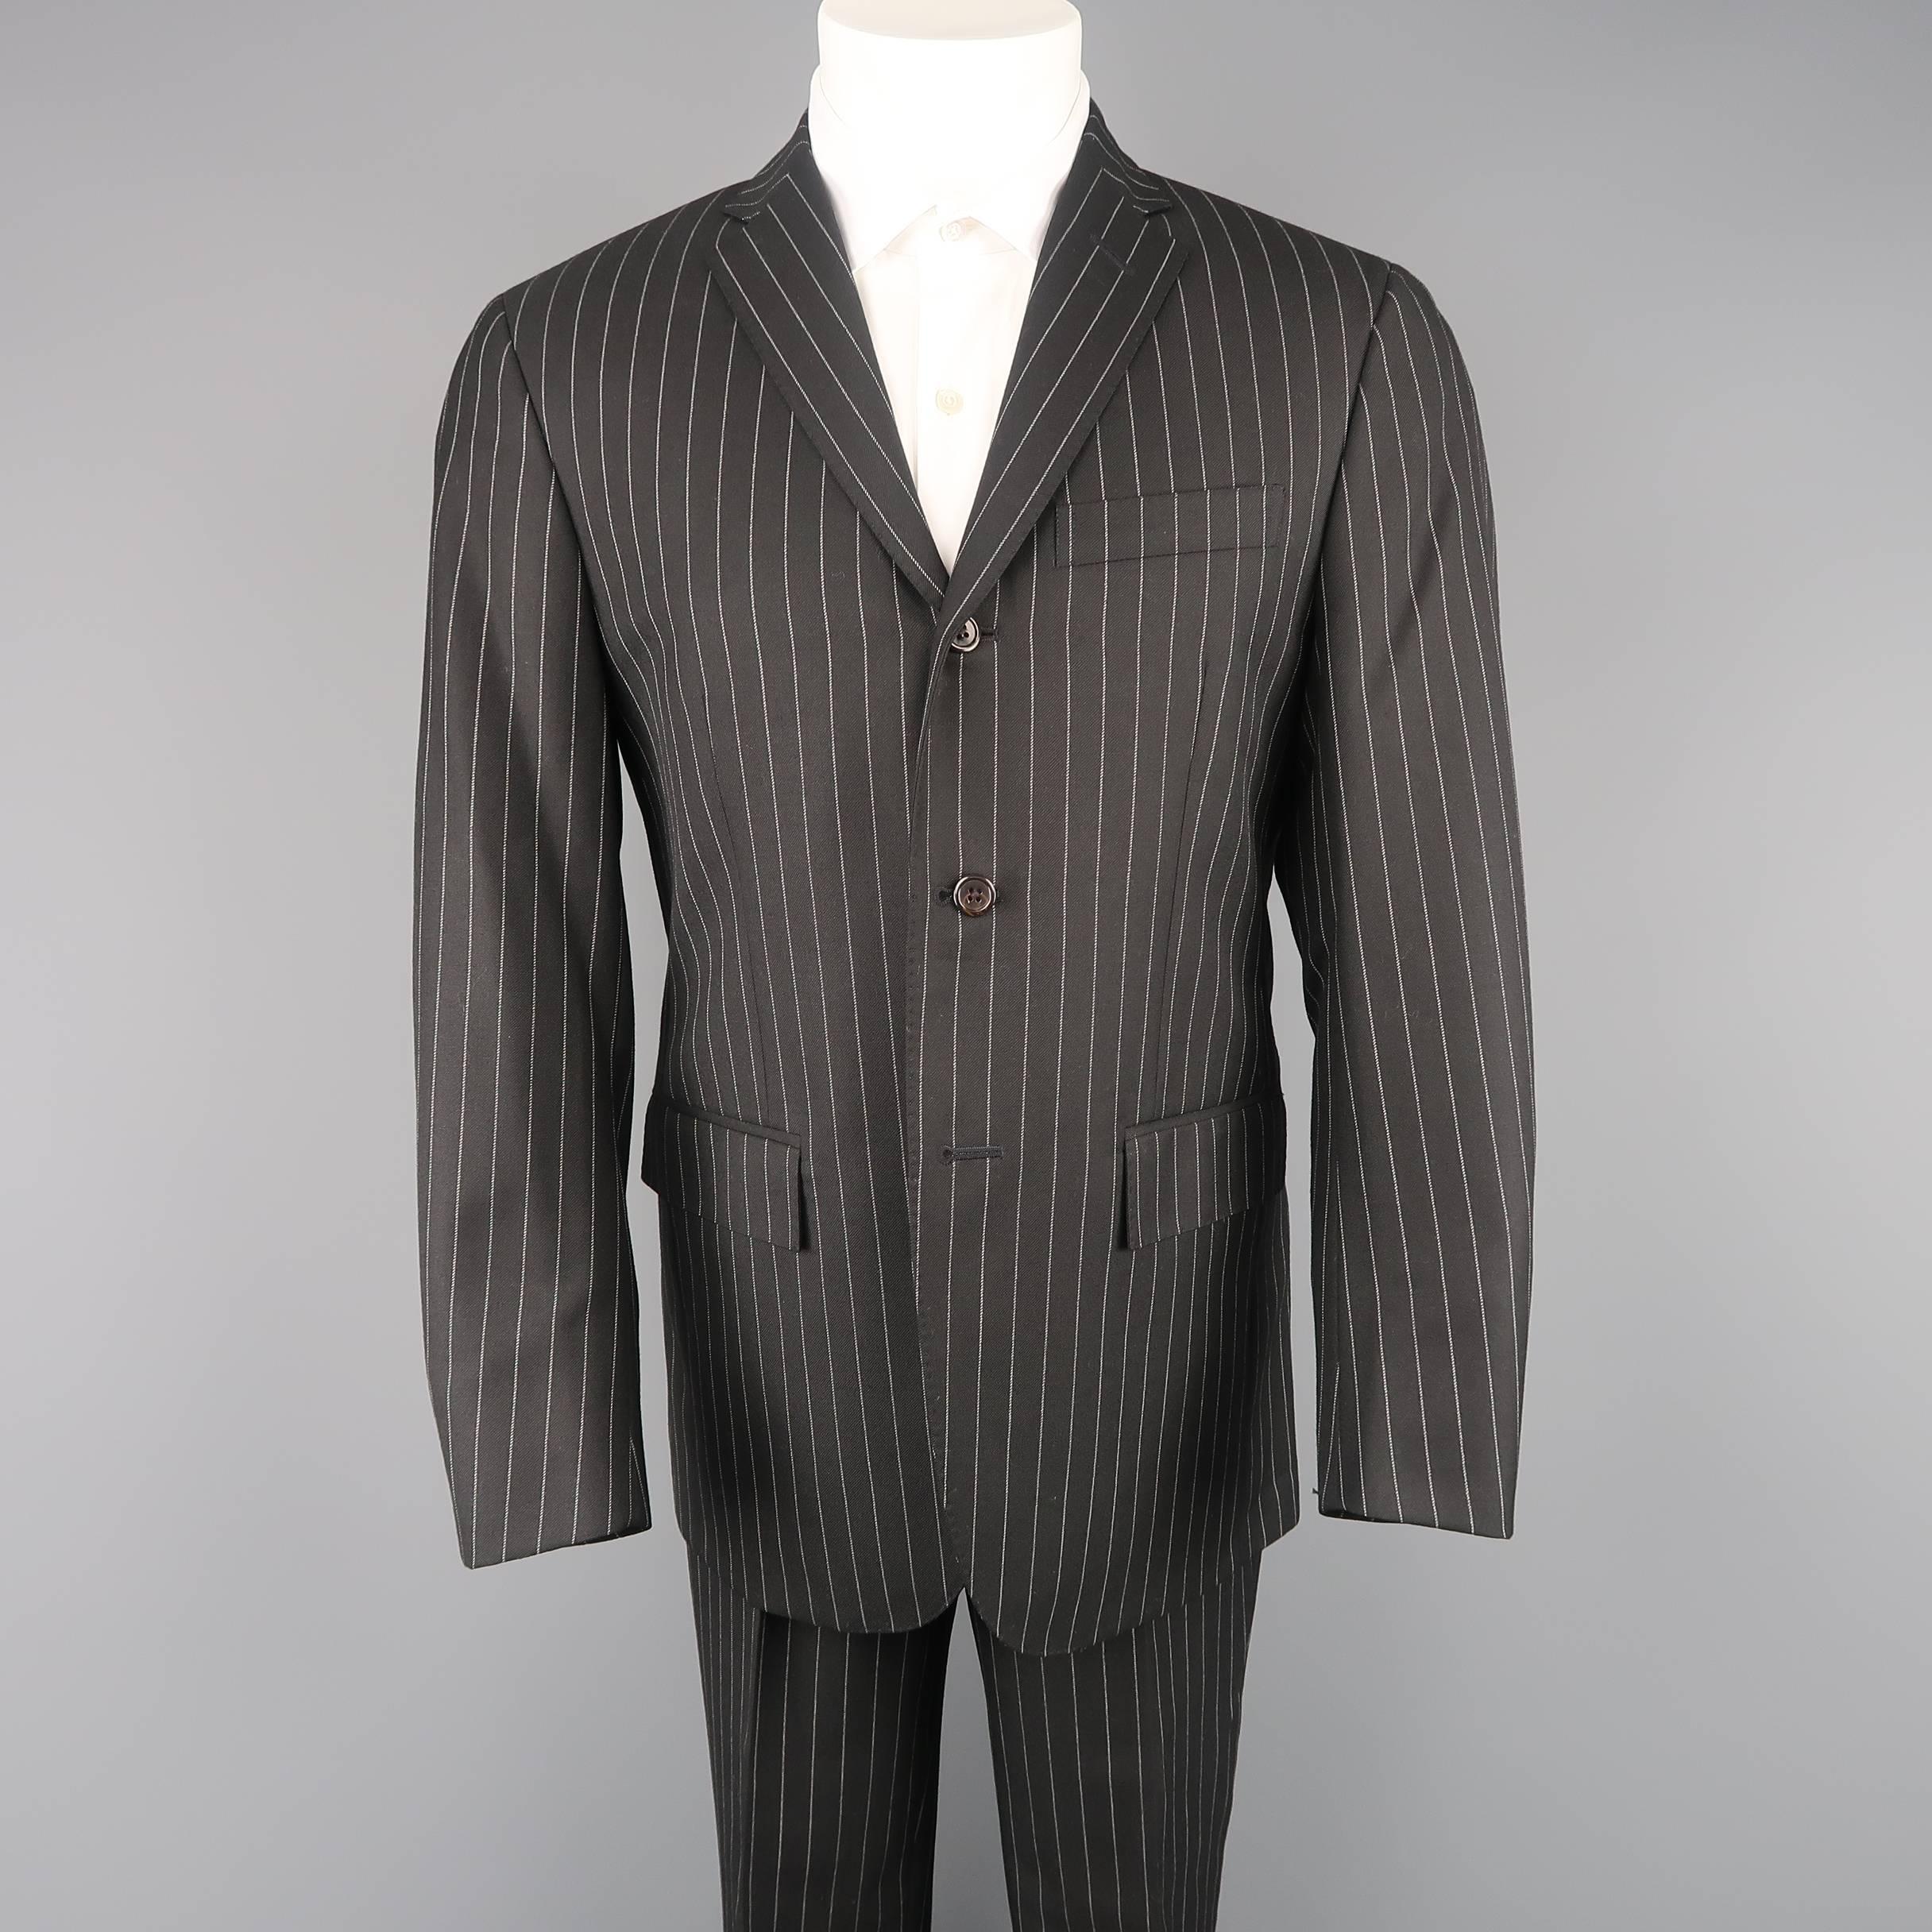 Polo Ralph Lauren  - Congressman two piece suit comes in black chalk stripe wool twill and includes a single breasted, three button sport coat with notch lapel and matching flat front dress pants. Made in Italy.
 
Excellent Pre-Owned